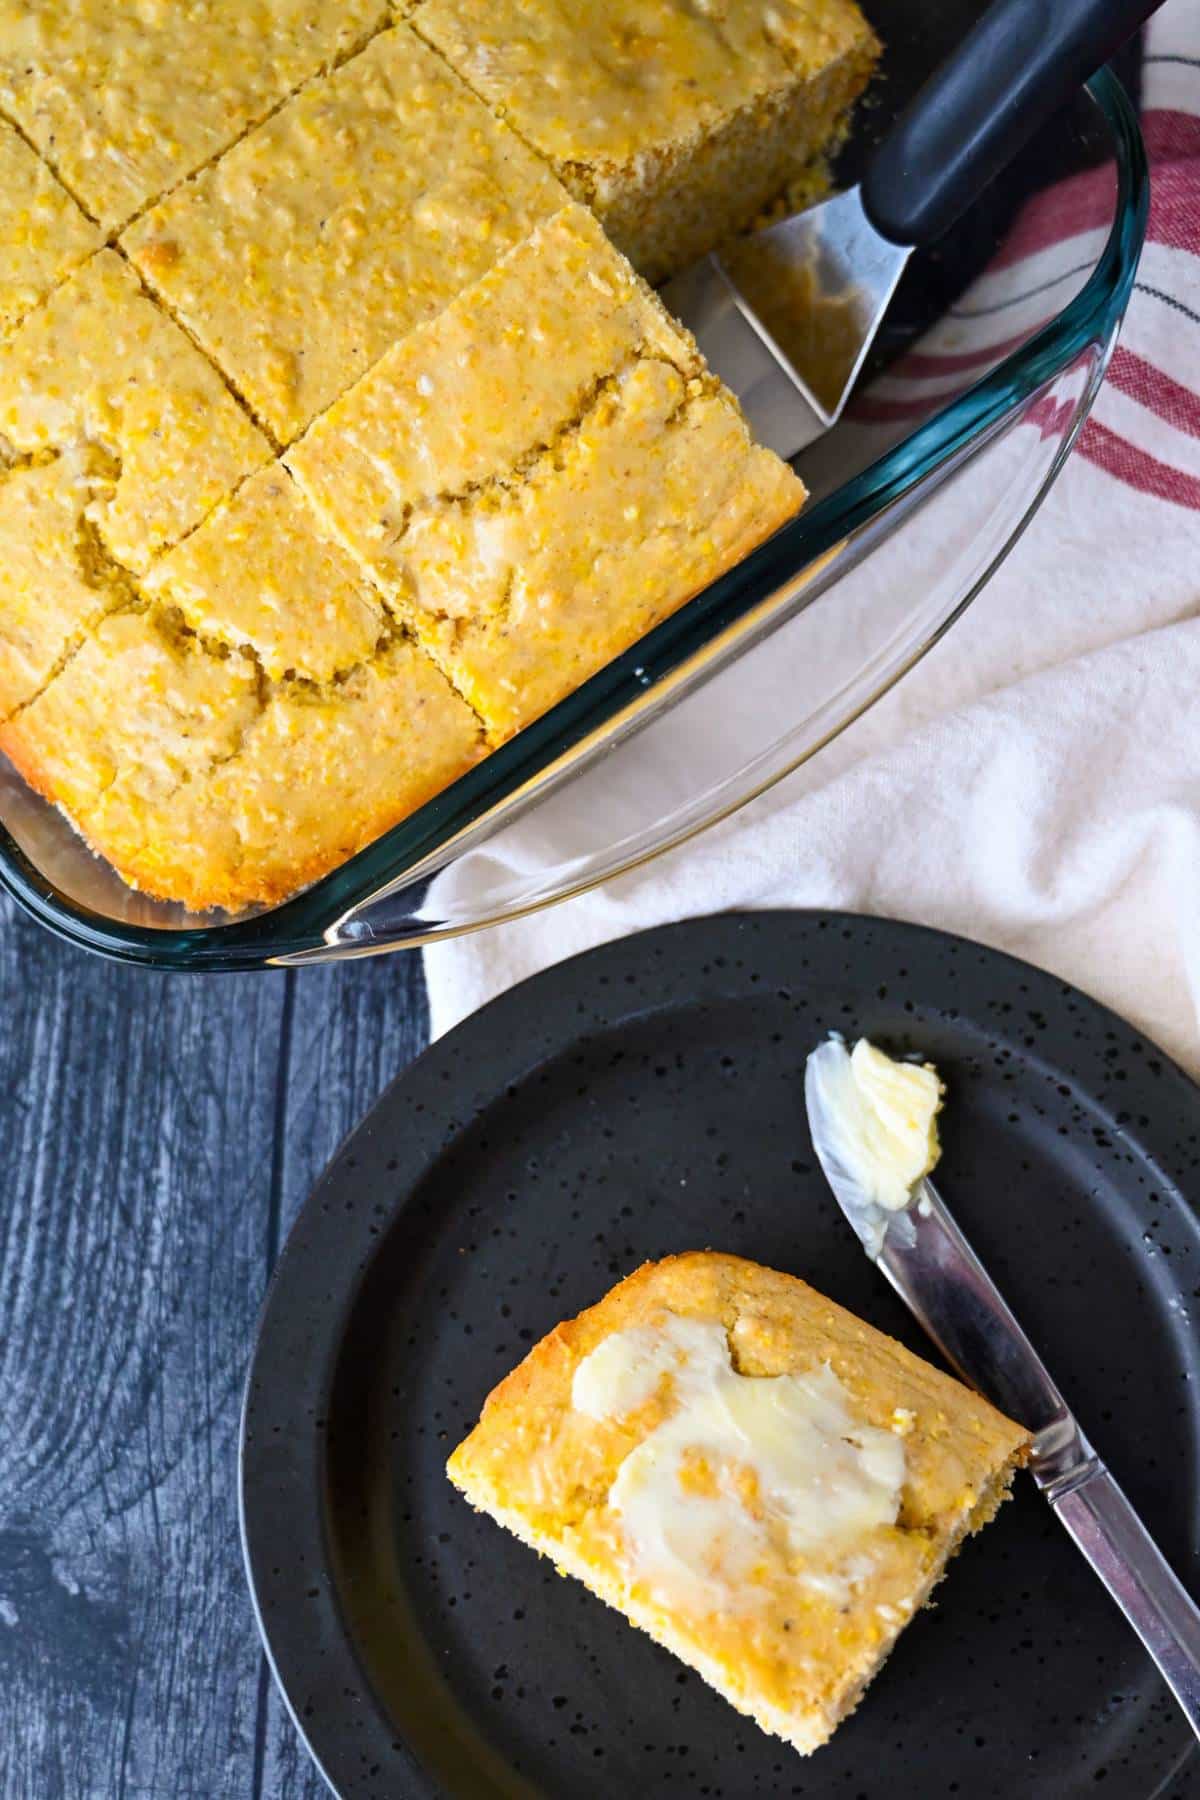 a pan of gf cornbread baked in a glass dish with a plate with a slice of cornbread